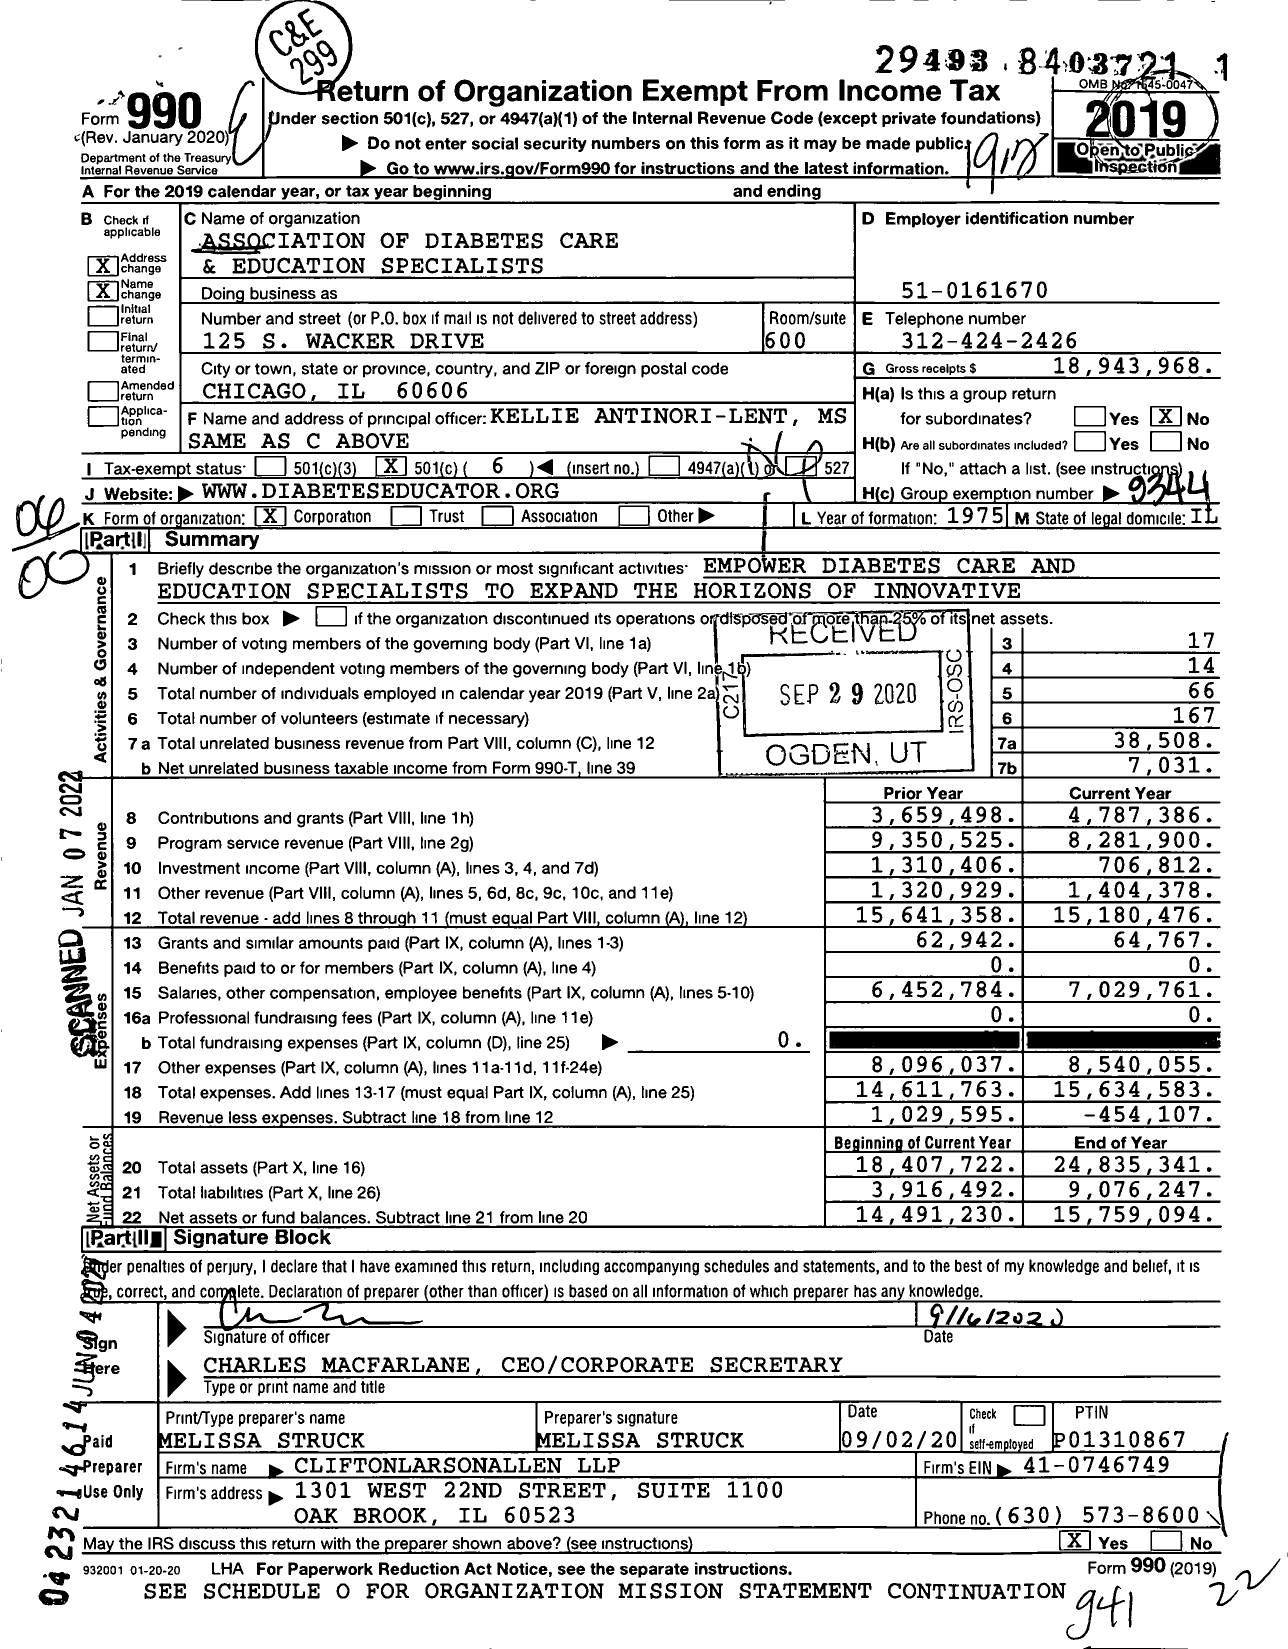 Image of first page of 2019 Form 990O for Association of Diabetes Care and Education Specialists